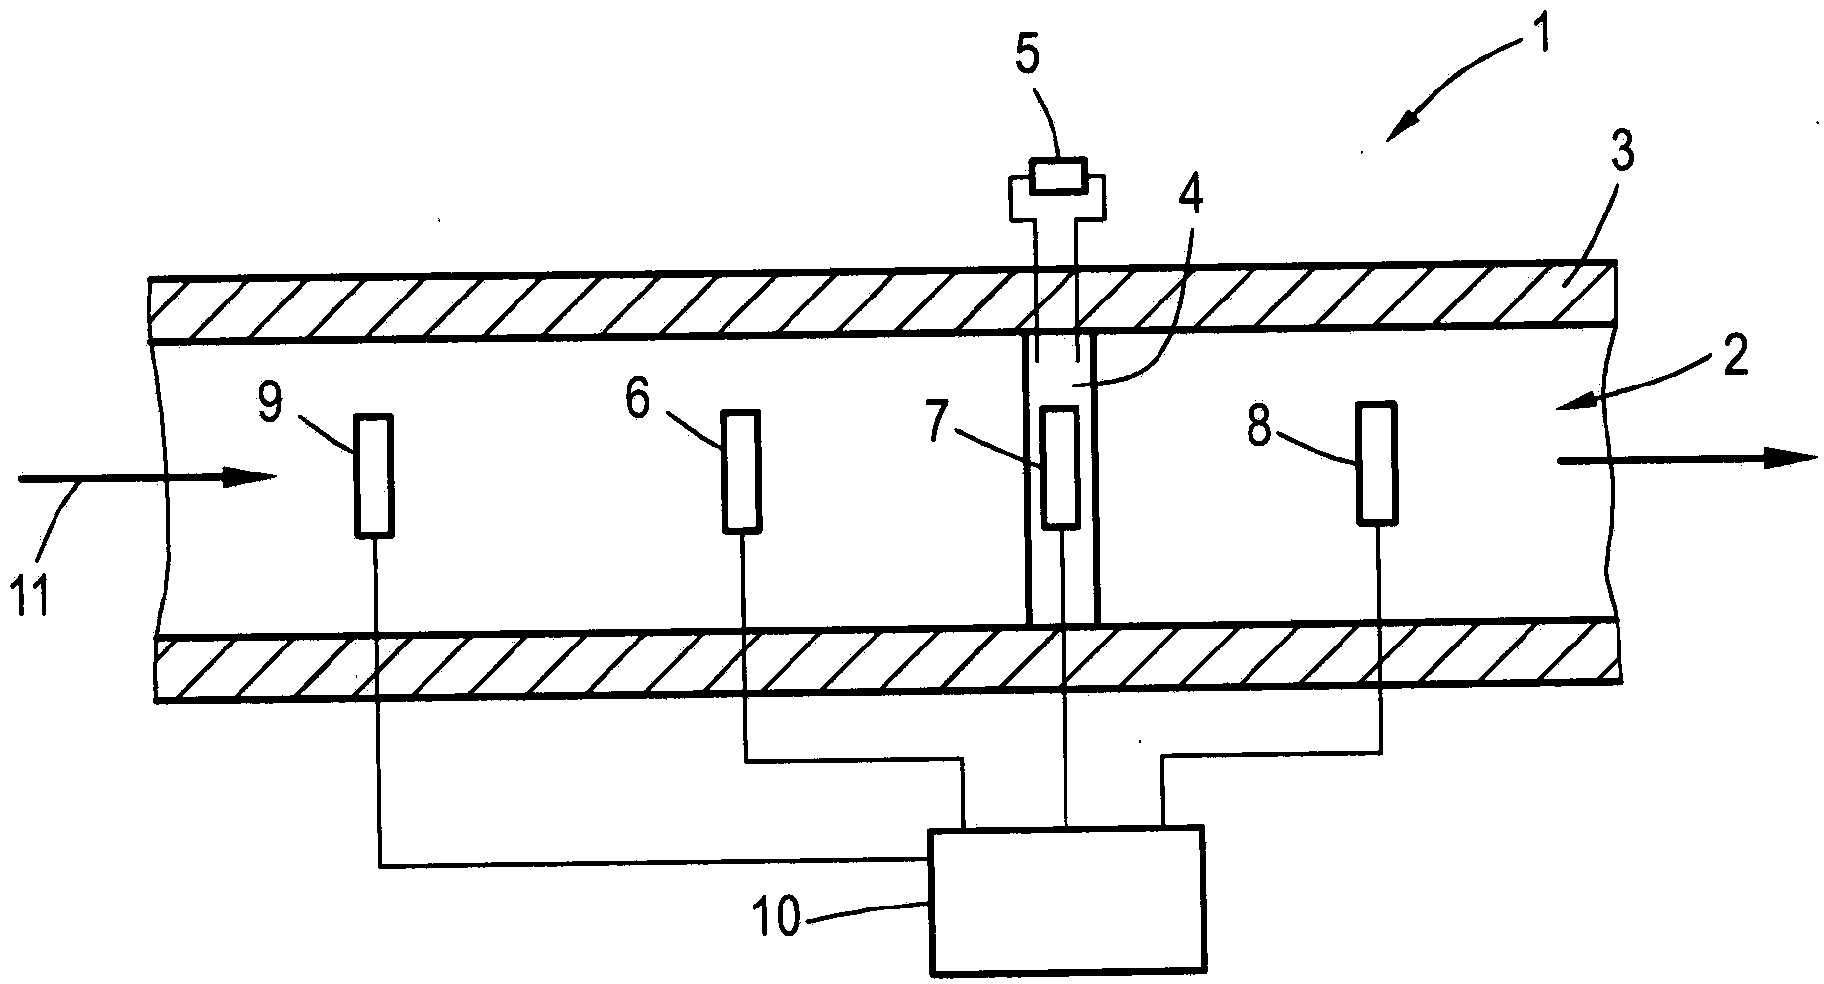 Method for determining at least one gas parameter of a flowing gas